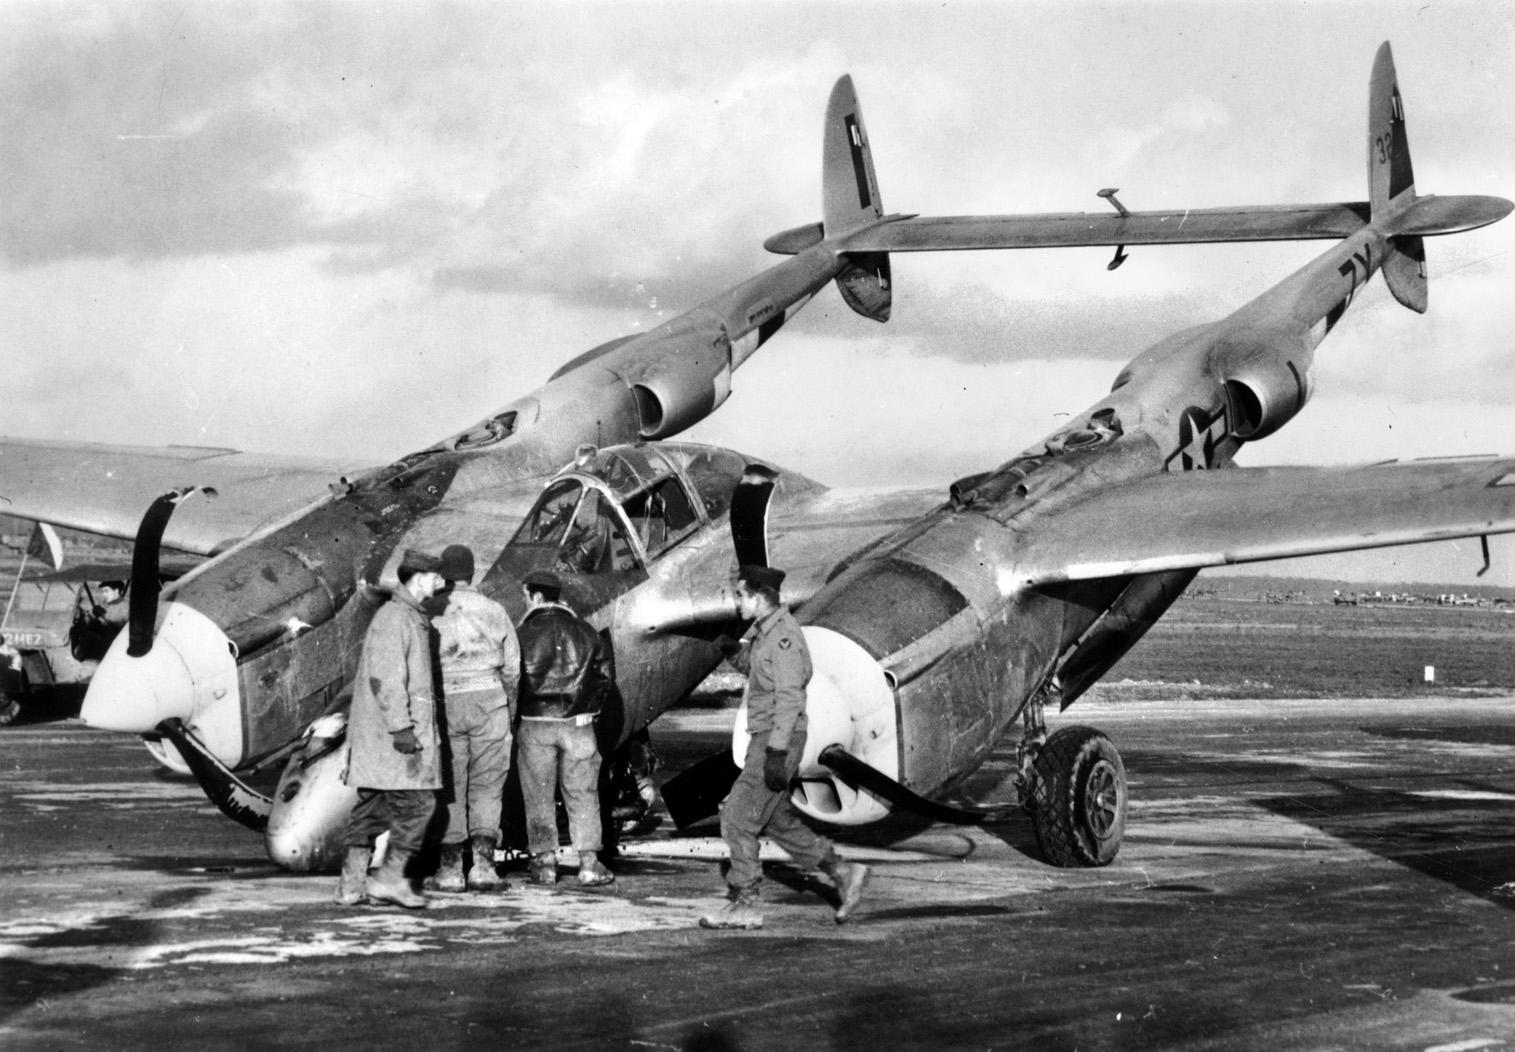 After experiencing a flat tire on landing, this P-38 Lightning fighter of the 429th Fighter Squadron has nosed over. Note the damage to the propellers as American personnel inspect the wreckage. 